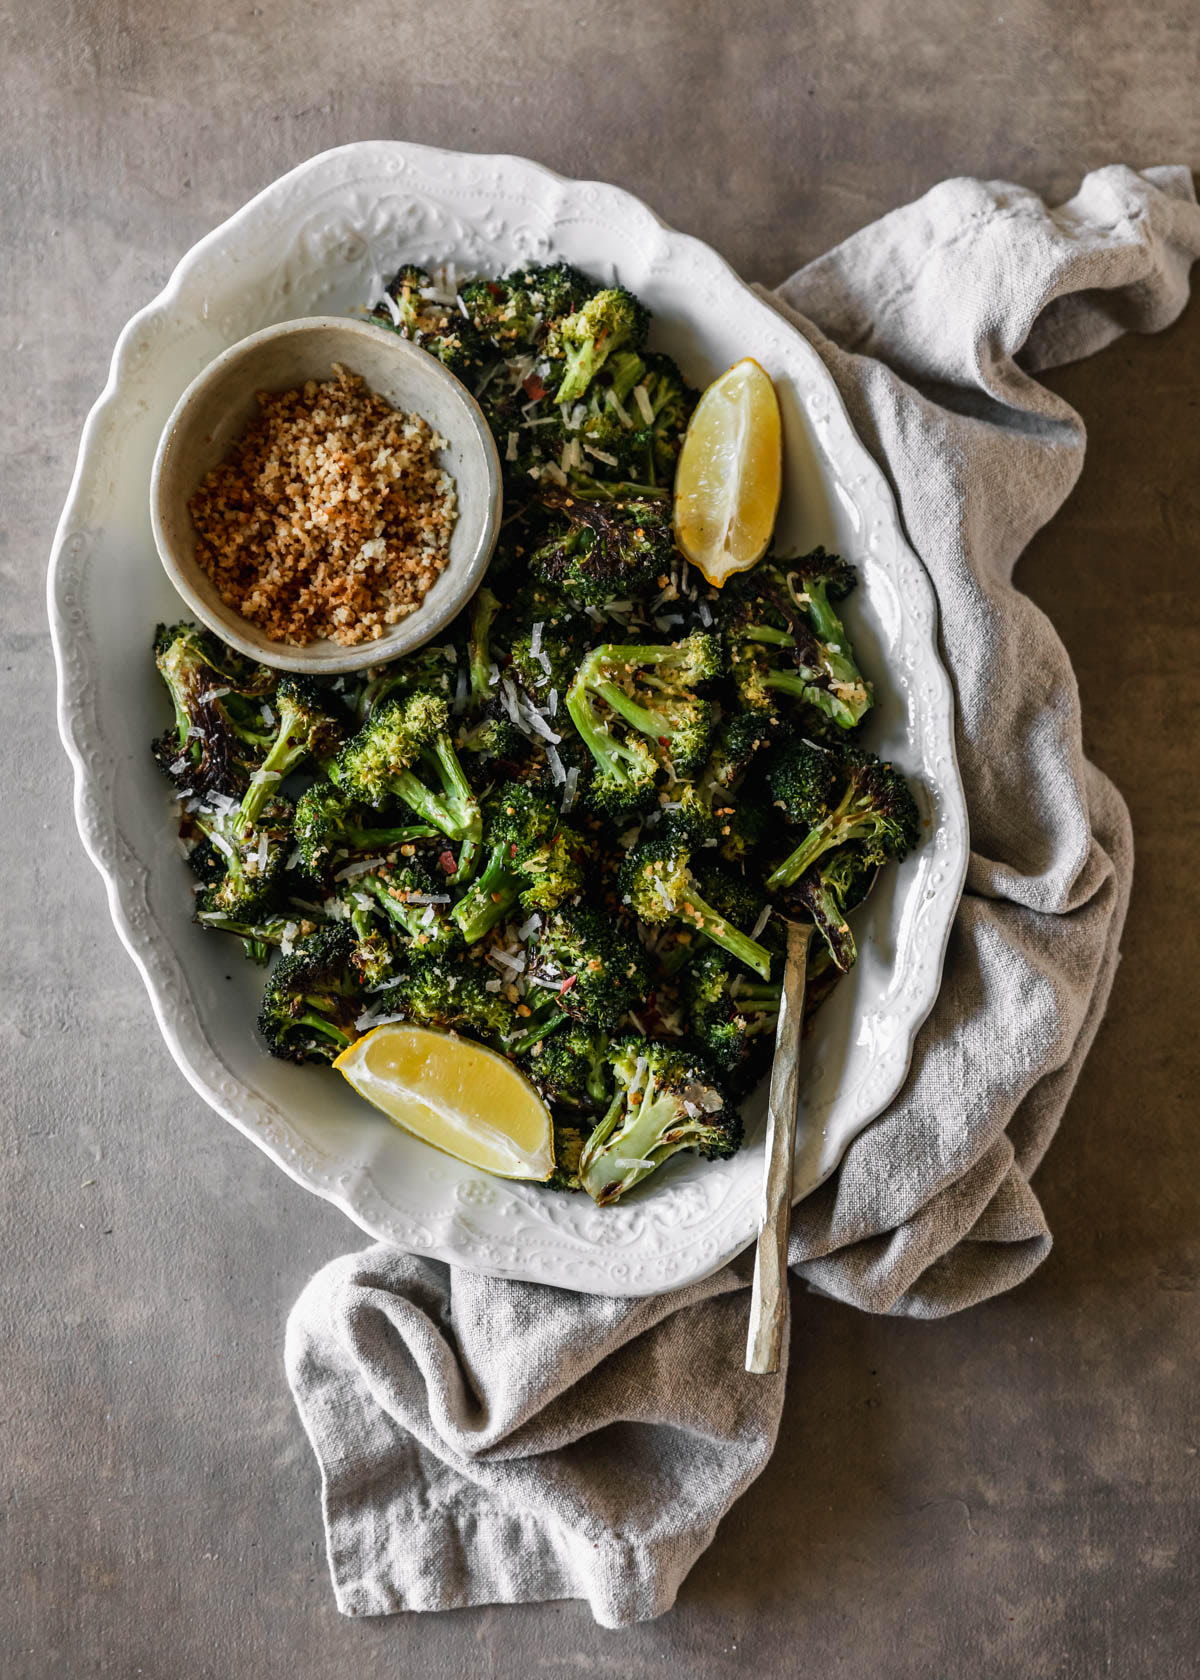 An overhead image of a white dish with charred broccoli on a brown counter next to a beige linen. There is a white bowl of breadcrumbs and lemon wedges on the white dish.